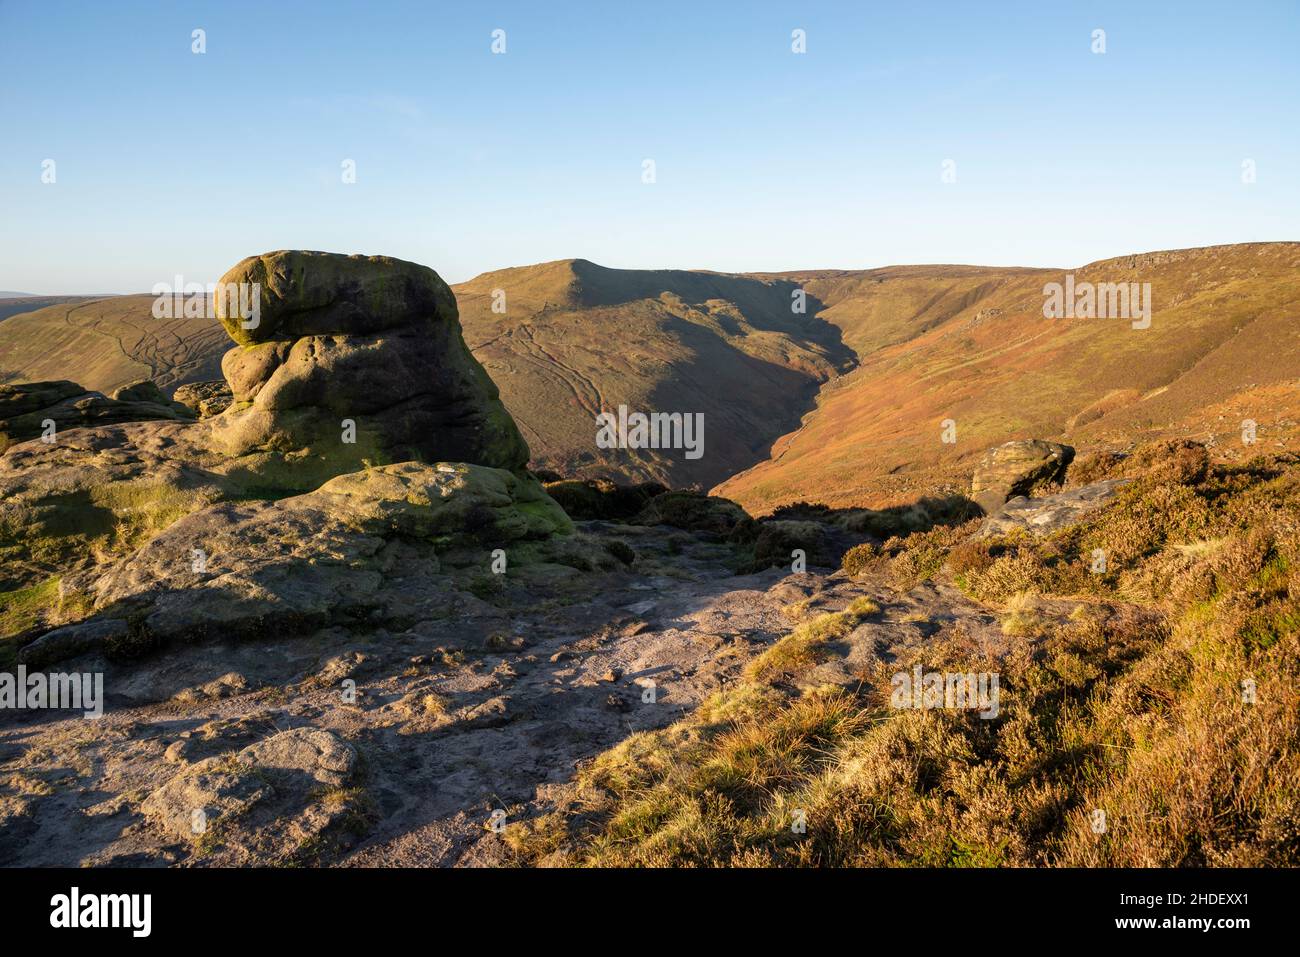 Gritstone outcrops at Ringing Roger on the edge of Kinder Scout, Edale, Derbyshire, Peak District, England. Stock Photo